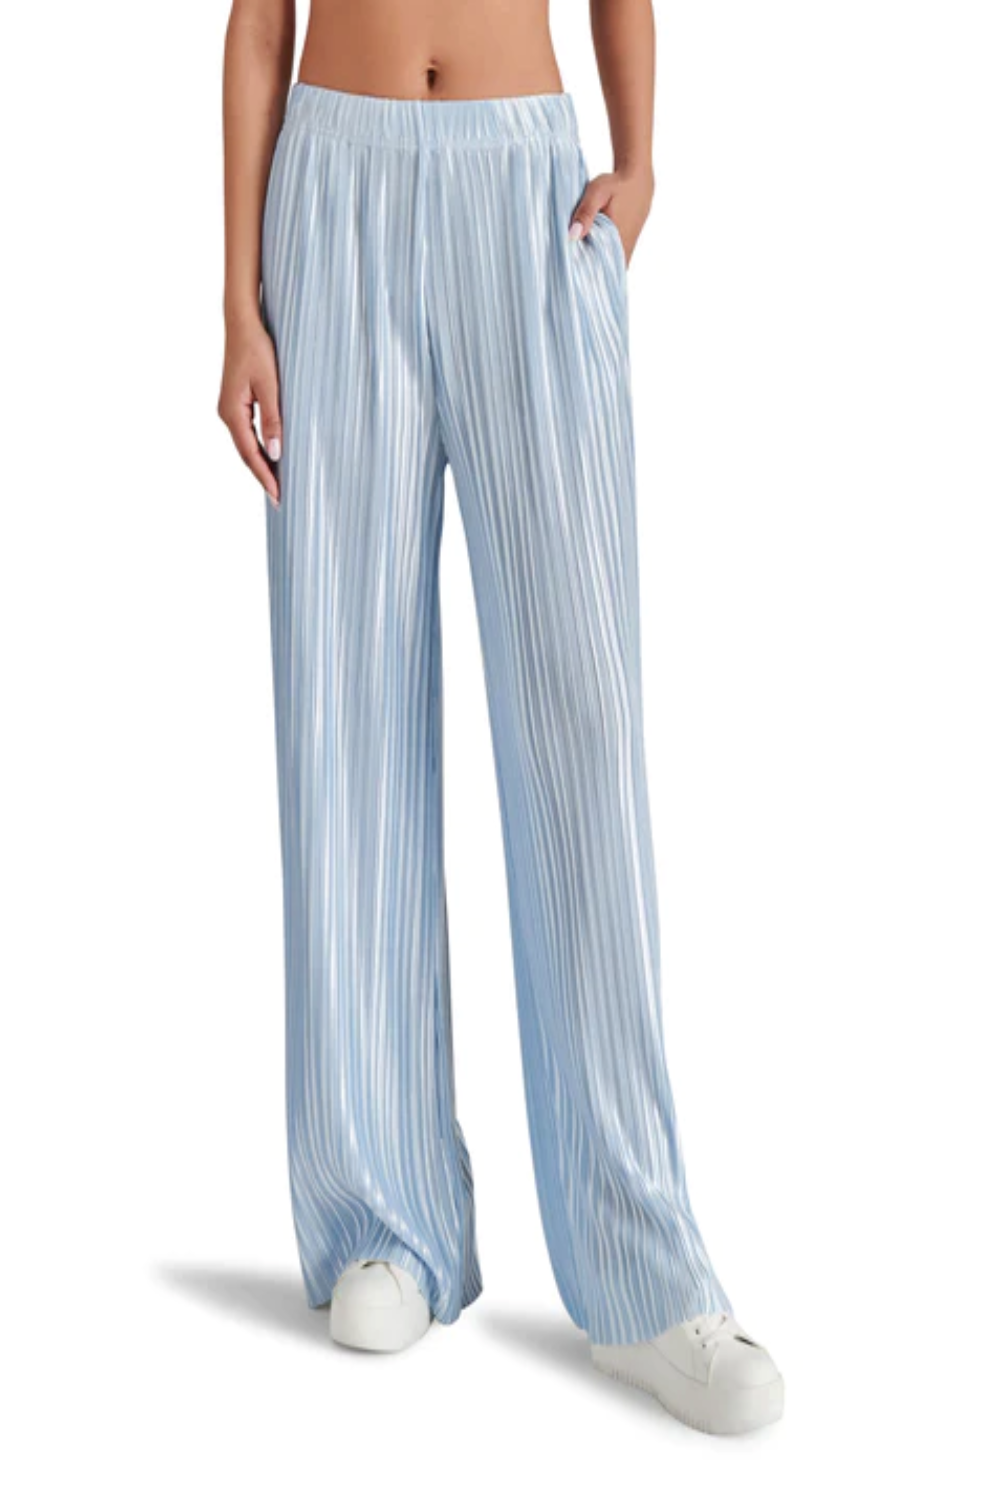 Ansel Pant in Sky Blue